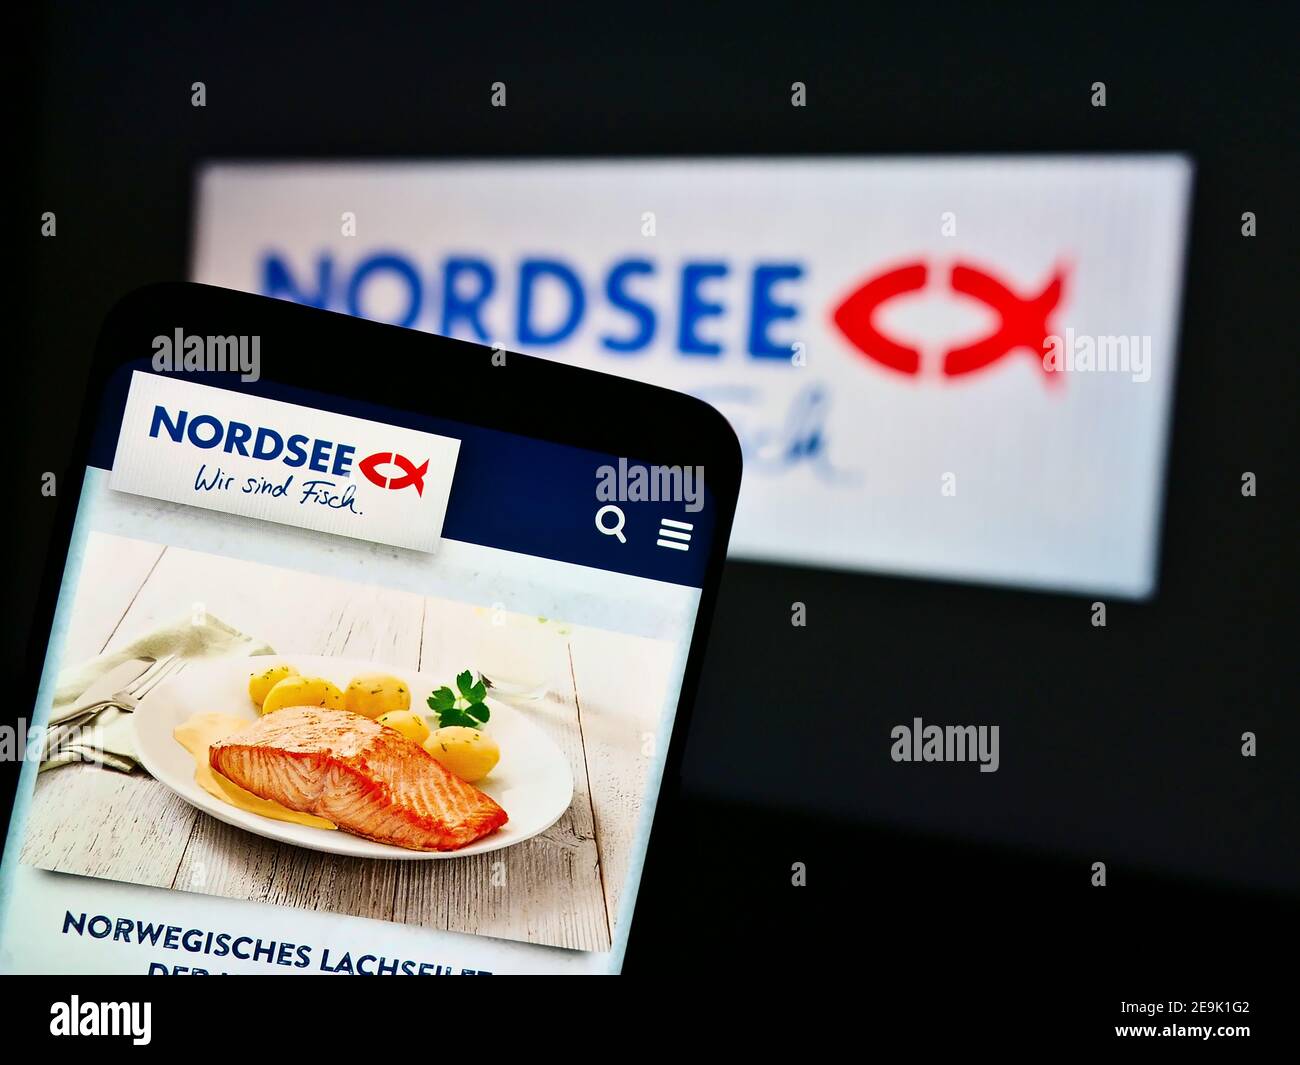 Mobile phone with meal of German fast-food restaurant chain Nordsee GmbH on display in front of company logo. Focus on top center of phone screen. Stock Photo